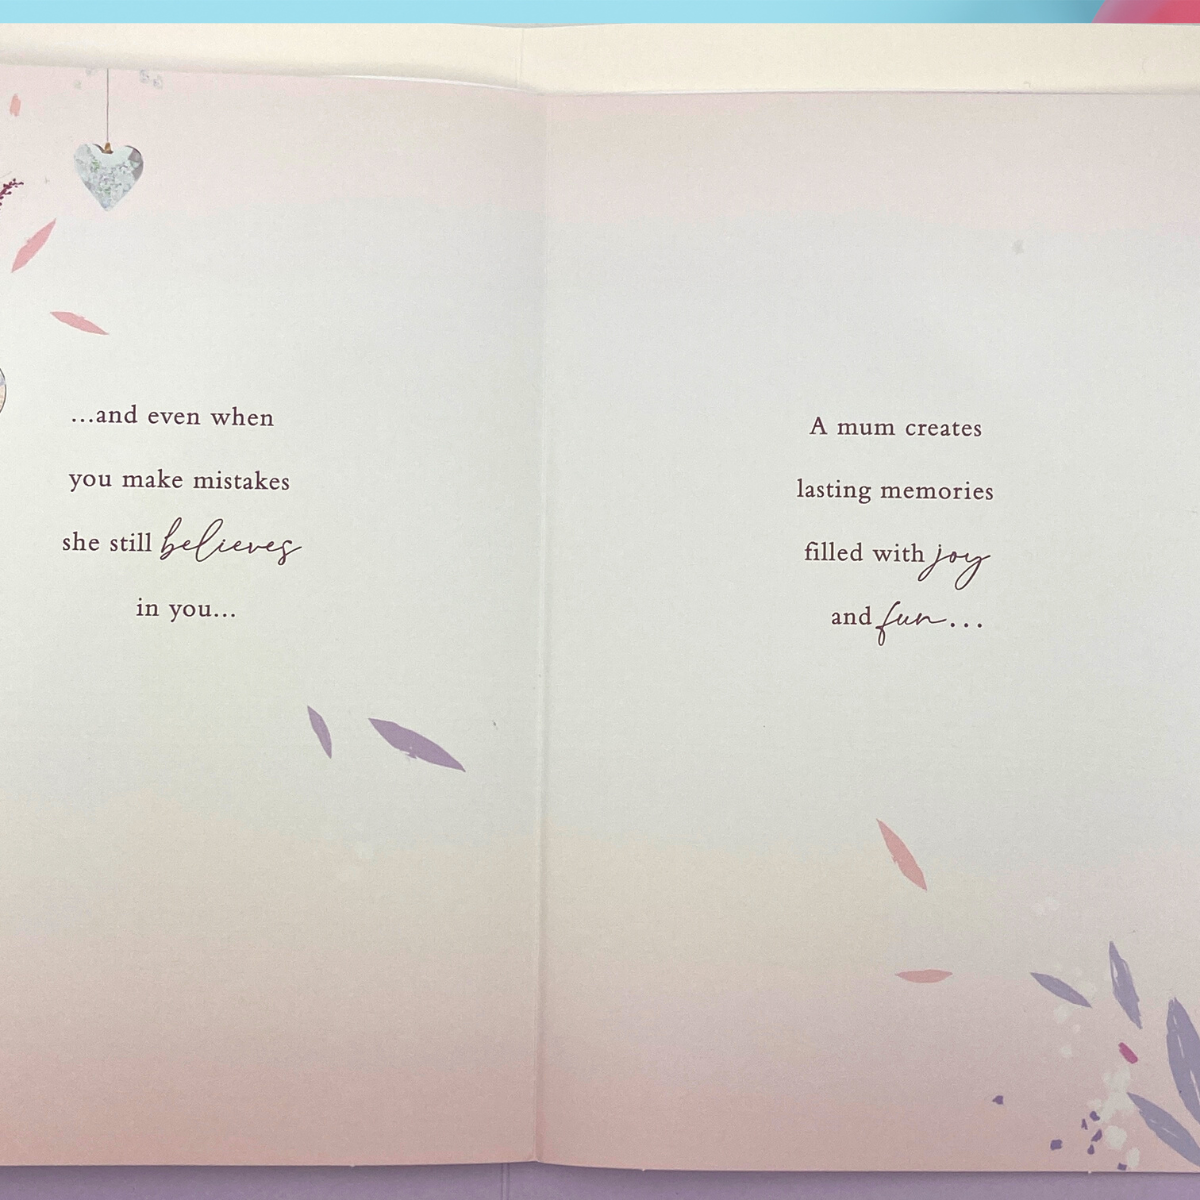 Inside image with further pages of heartfelt words